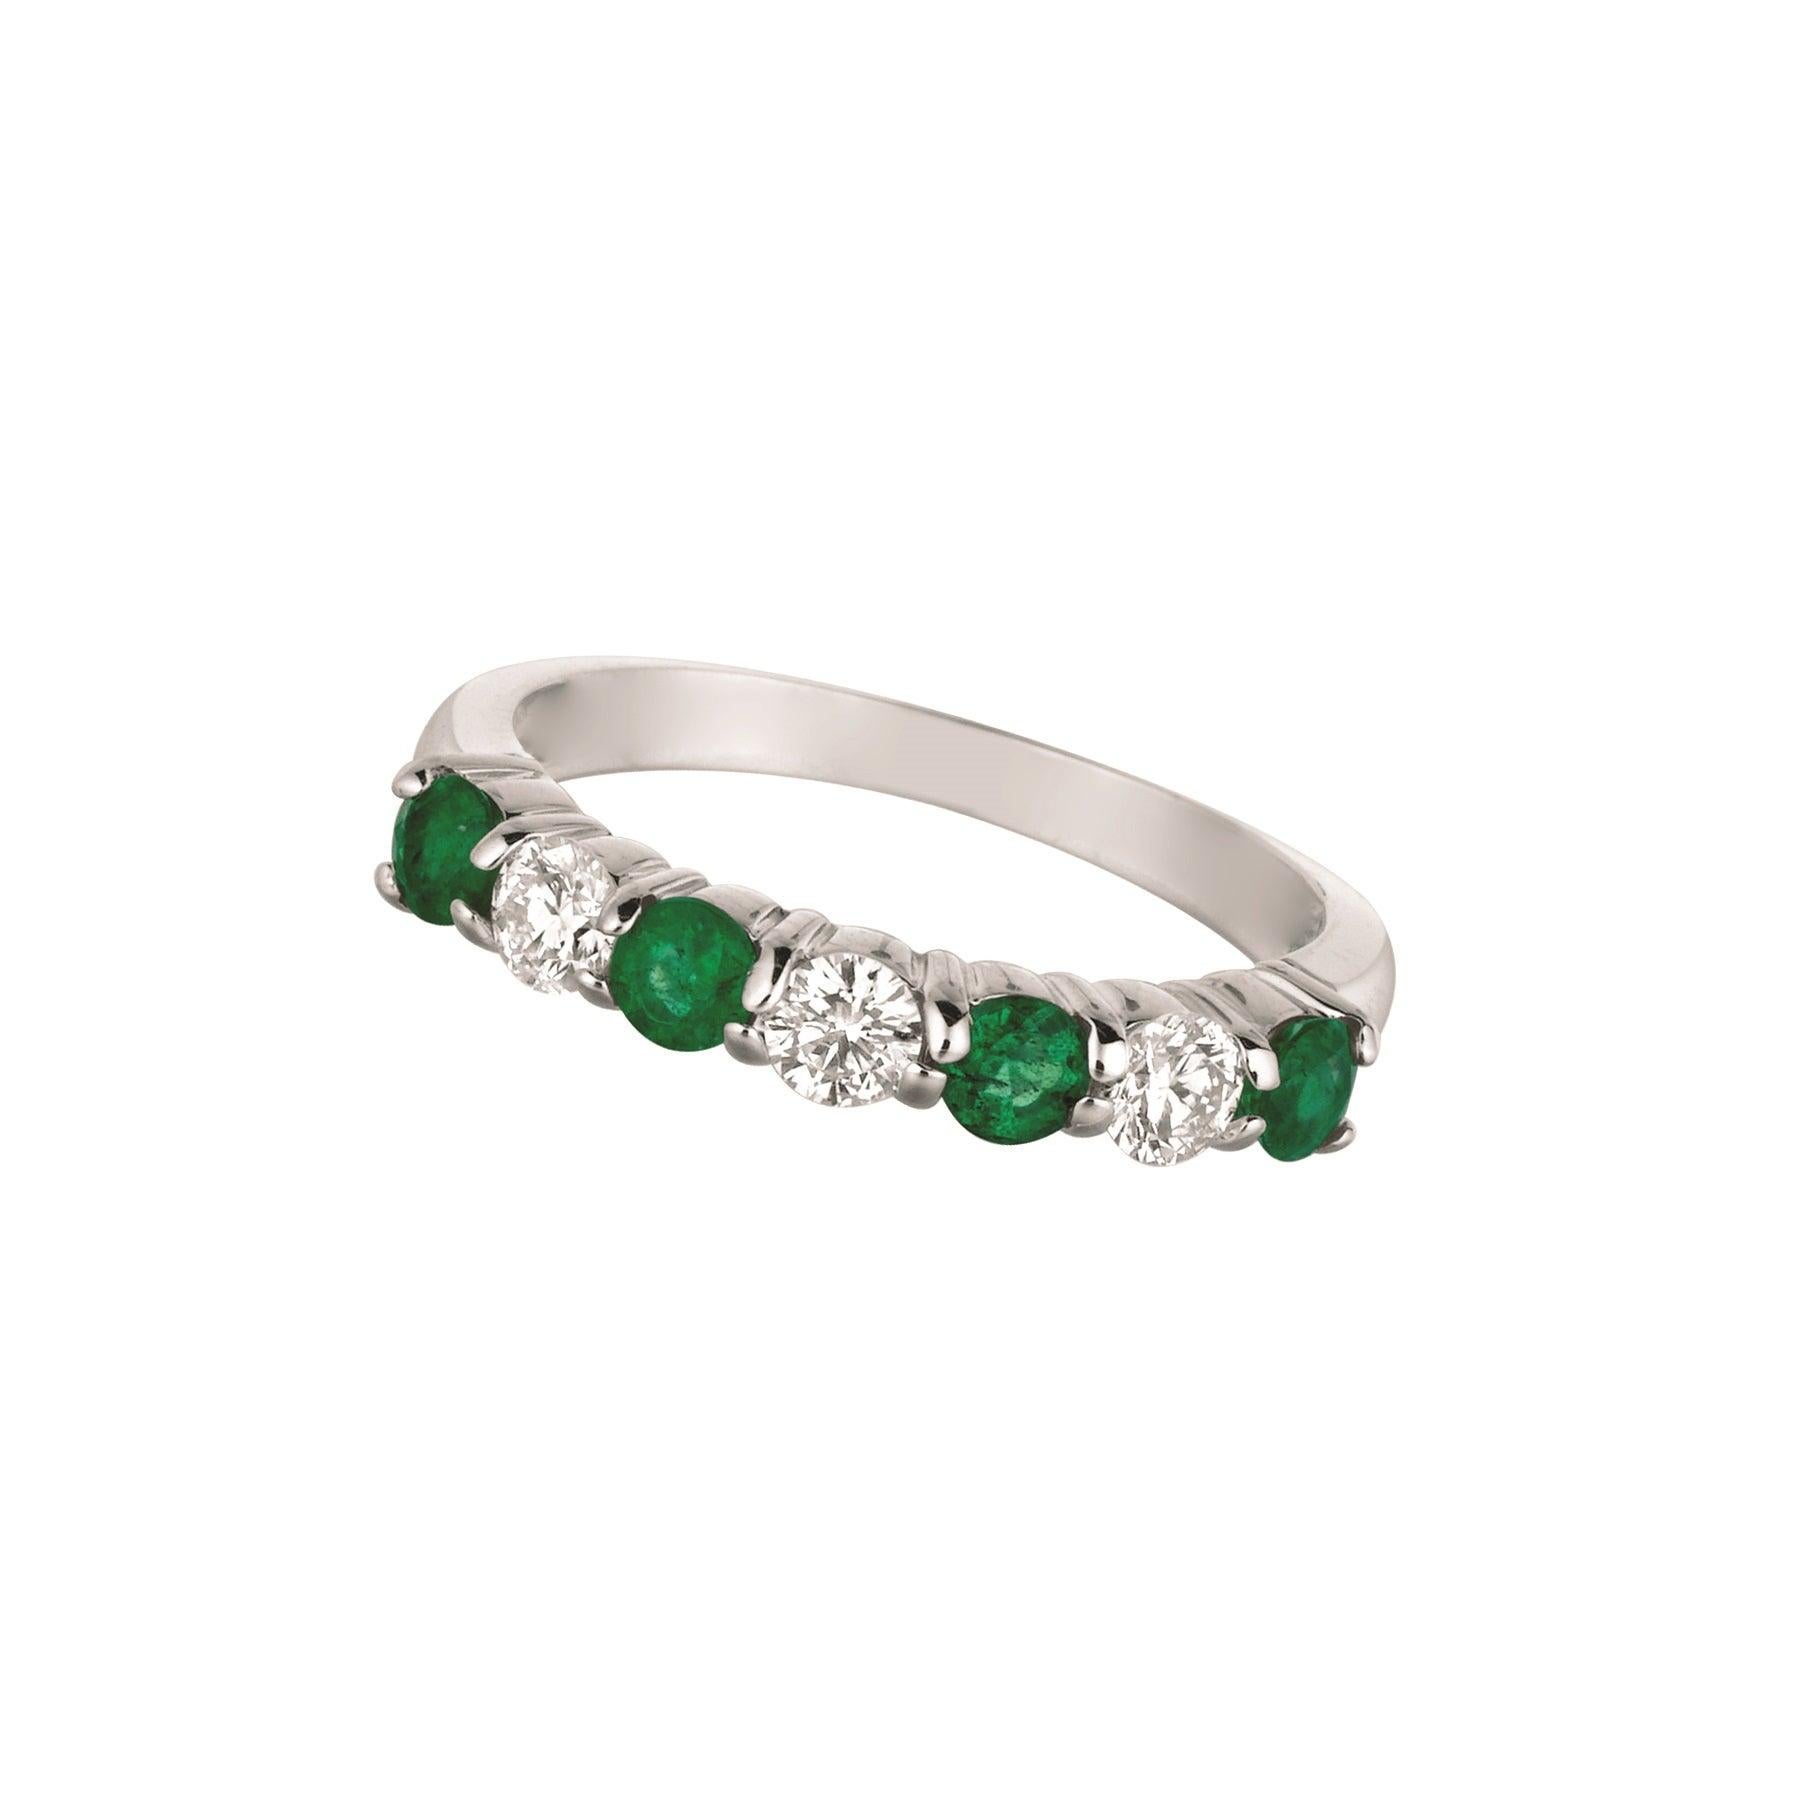 For Sale:  1.45 Carat Natural Diamond and Emerald 7-Stone Ring Band 14 Karat White Gold 3